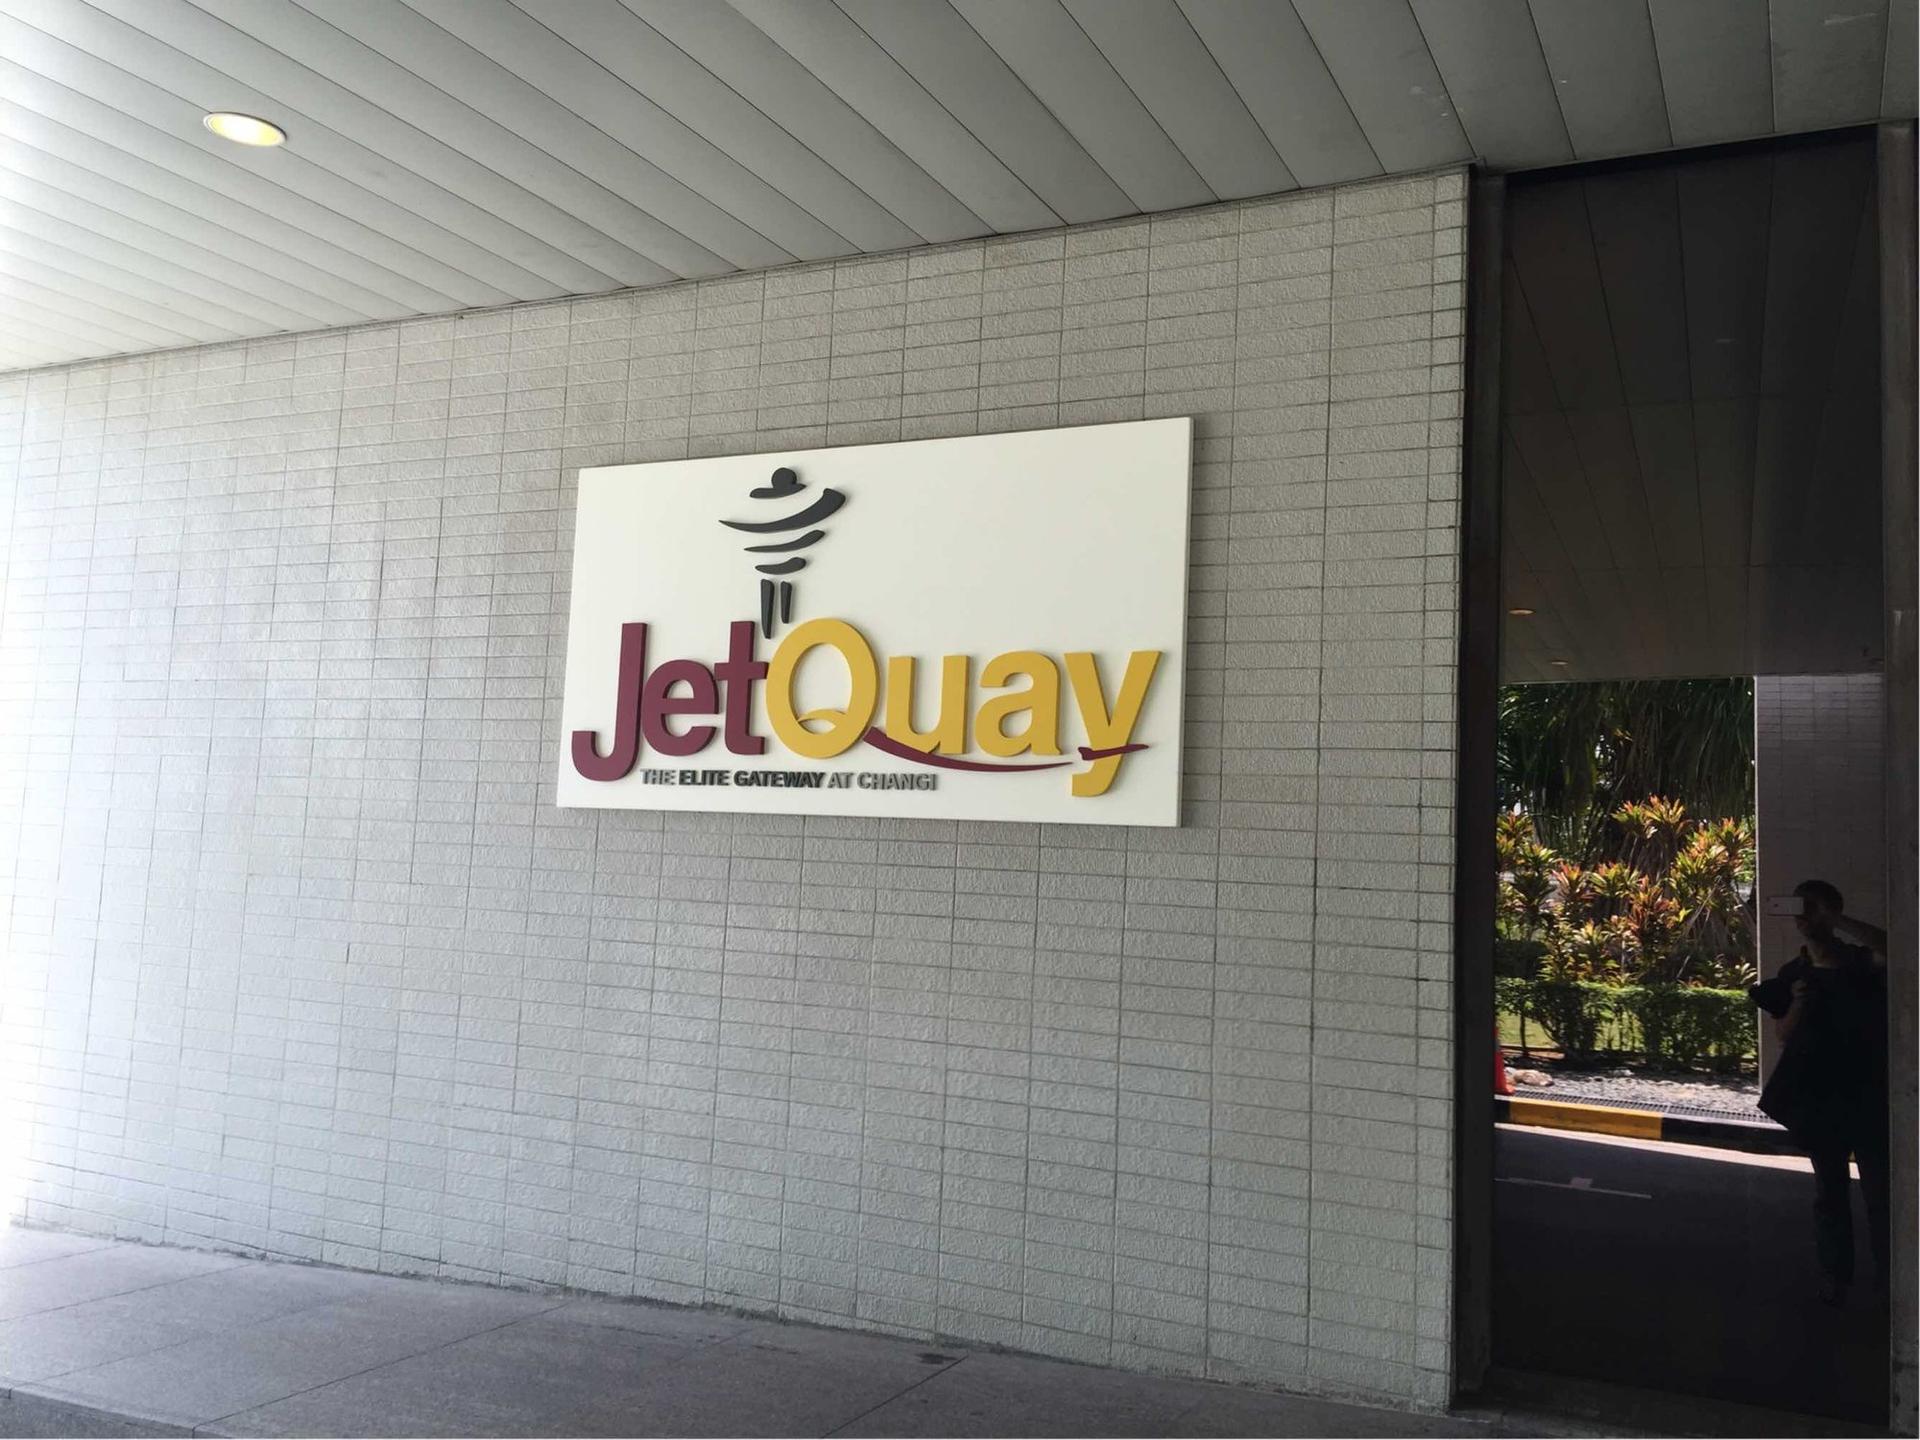 JetQuay CIP Terminal Lounge image 6 of 7